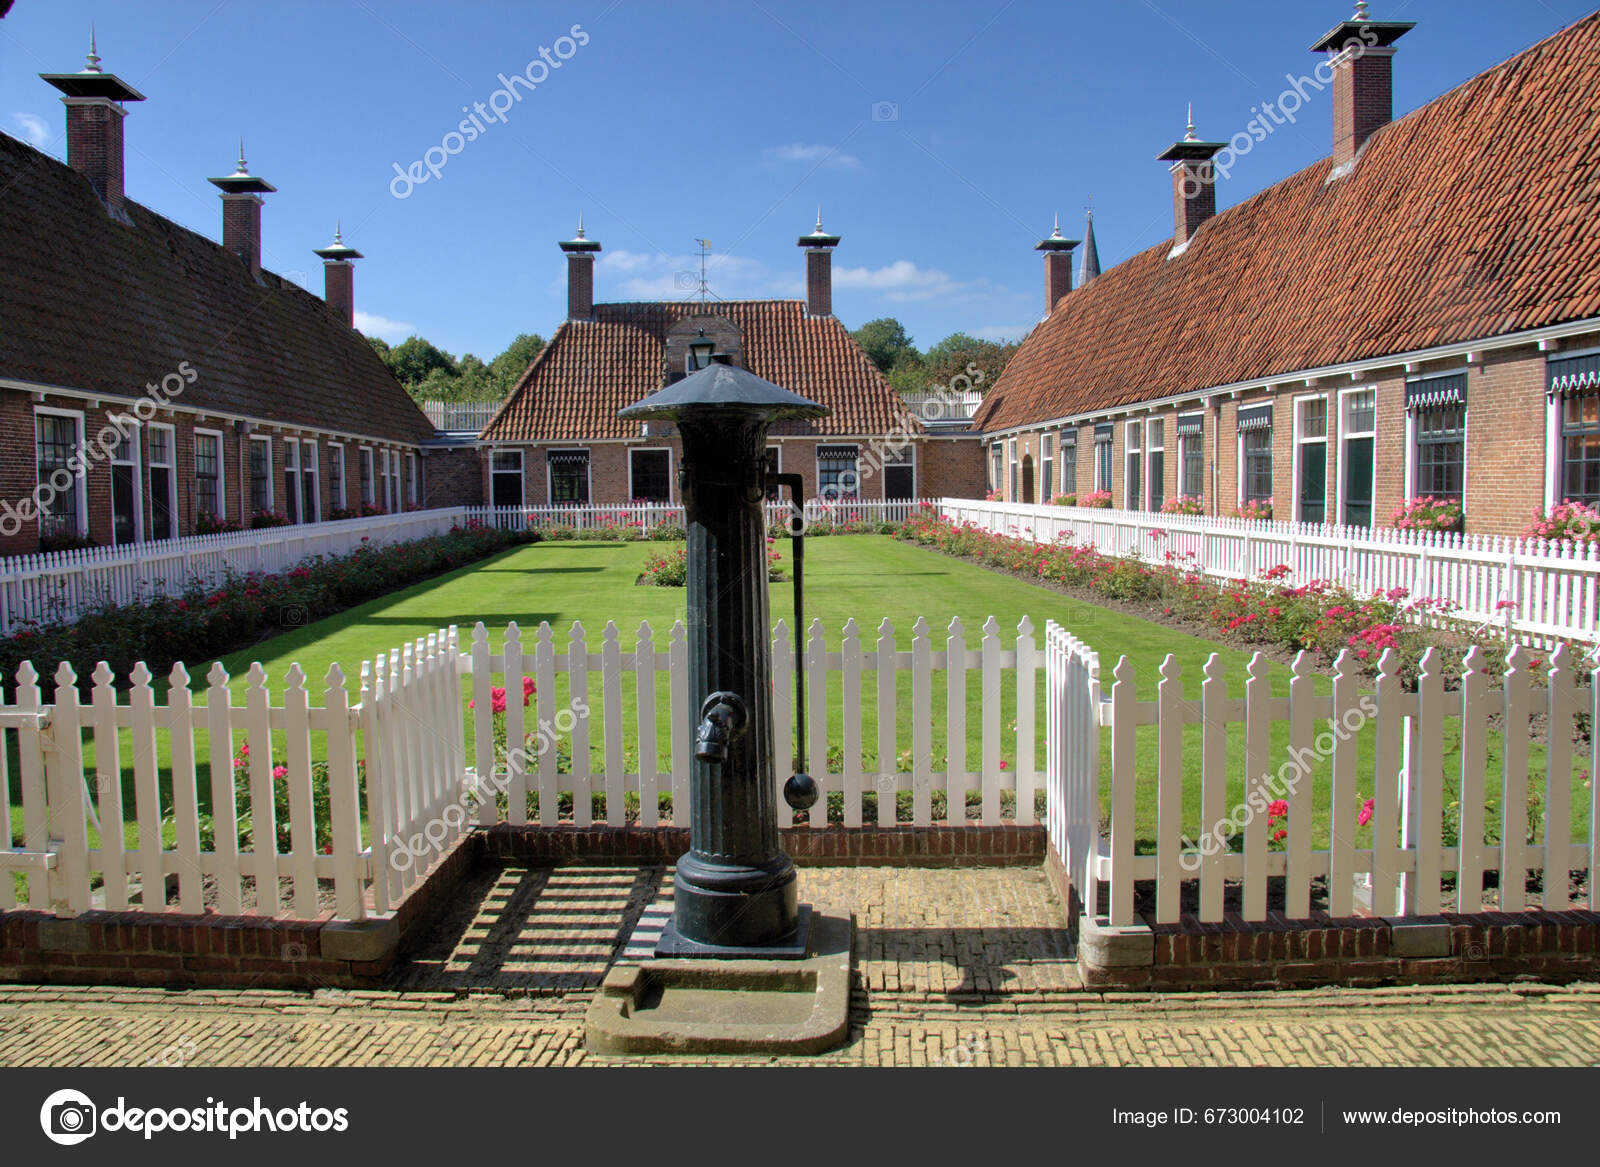 Henricus Popta 1635 1712 Initiated Construction Gasthuis Literally Meaning  Guesthouse Stock Photo by ©jehoede 673004102